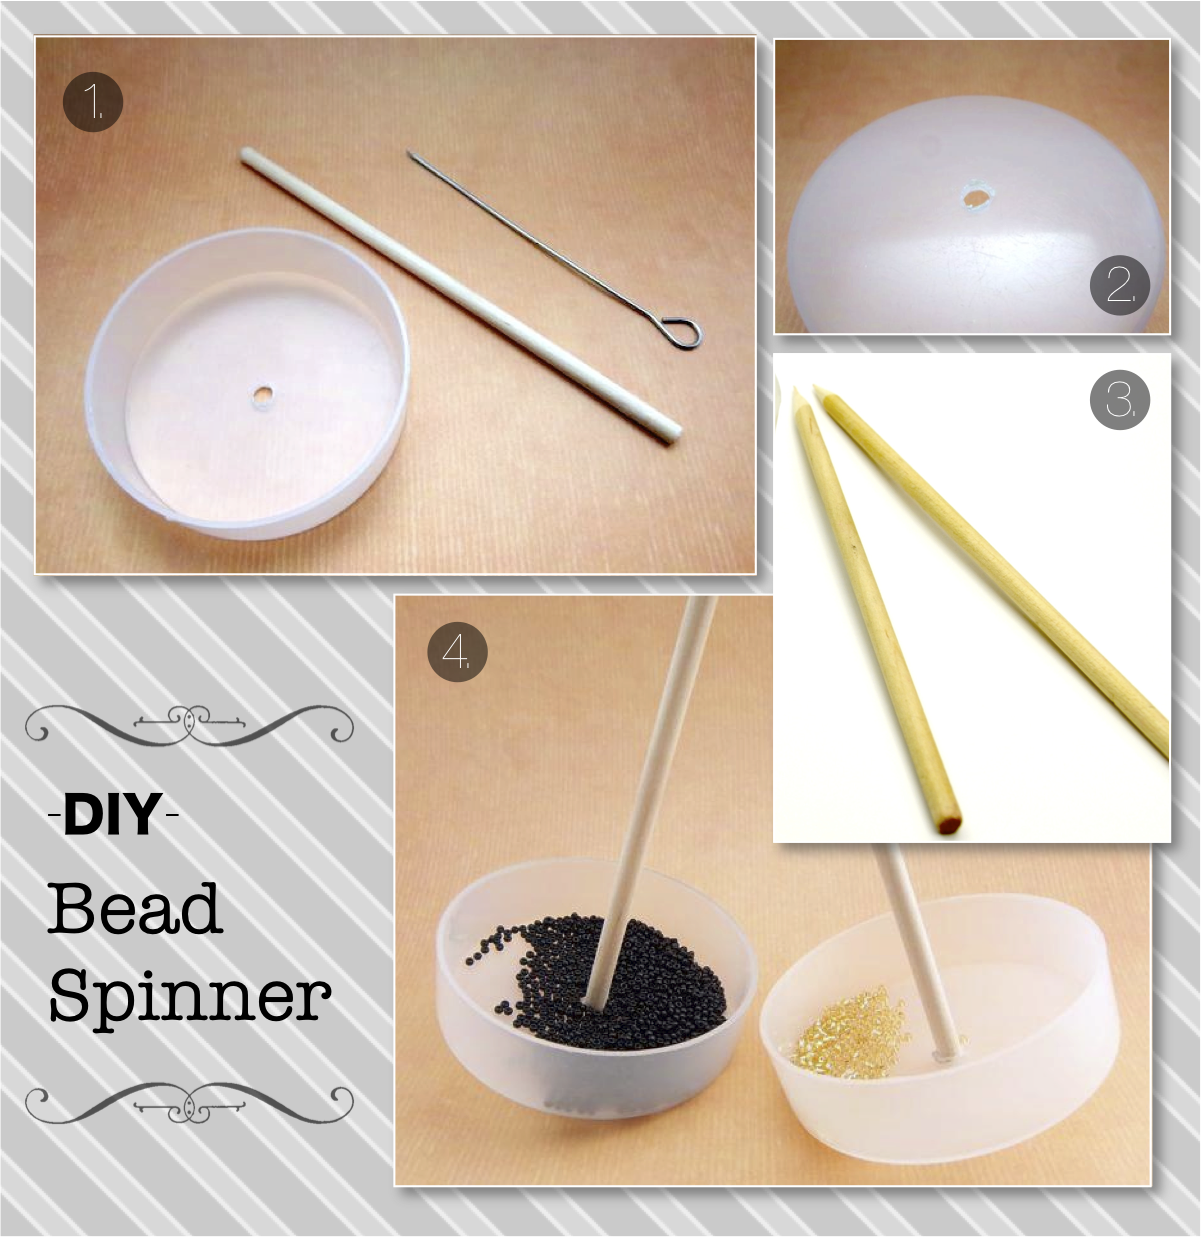 How to make a Beads Spinner